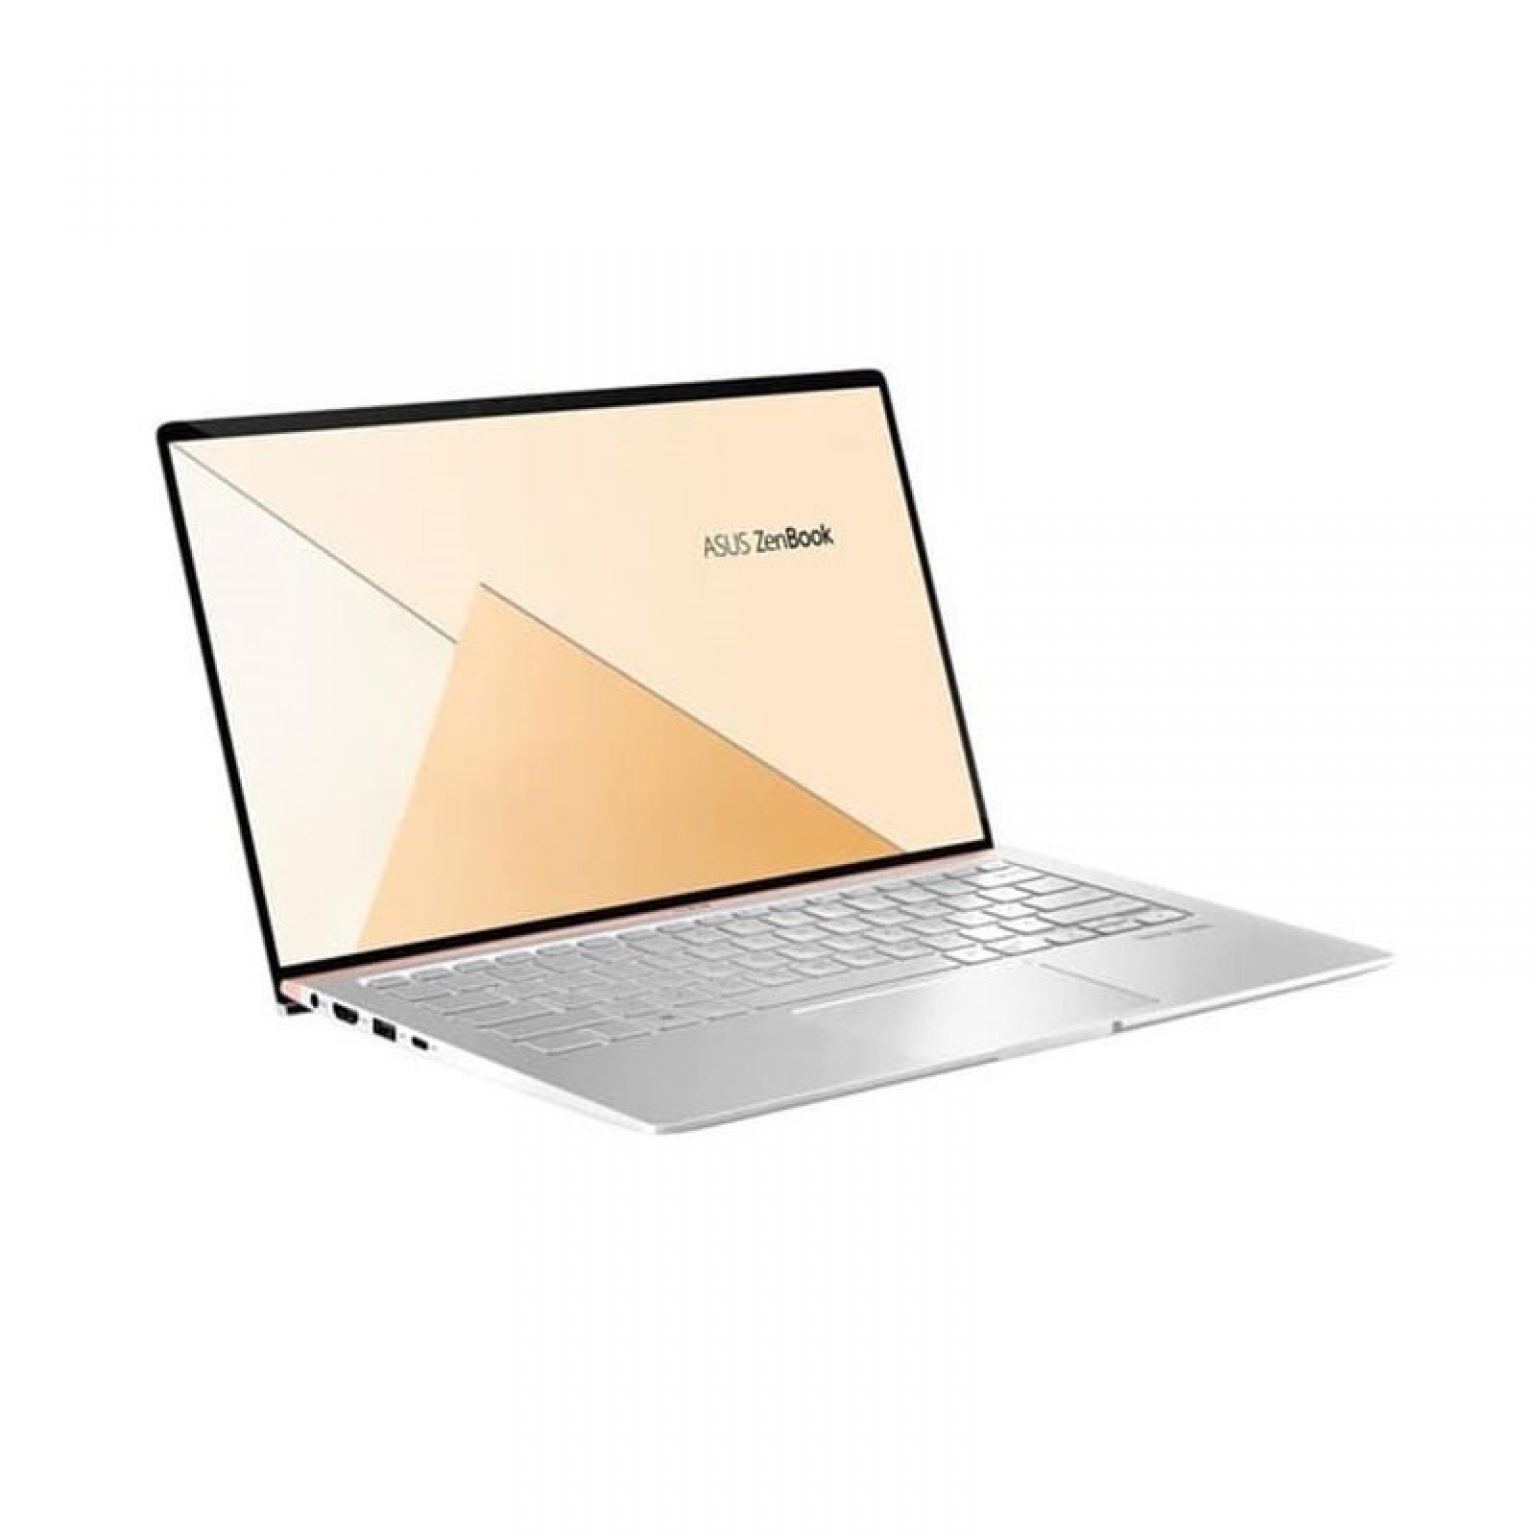 ASUS - ZenBook UX333FA-A5812T (i5-8265U/8GB RAM/512GB SSD/Win10SL/Icicle Silver)